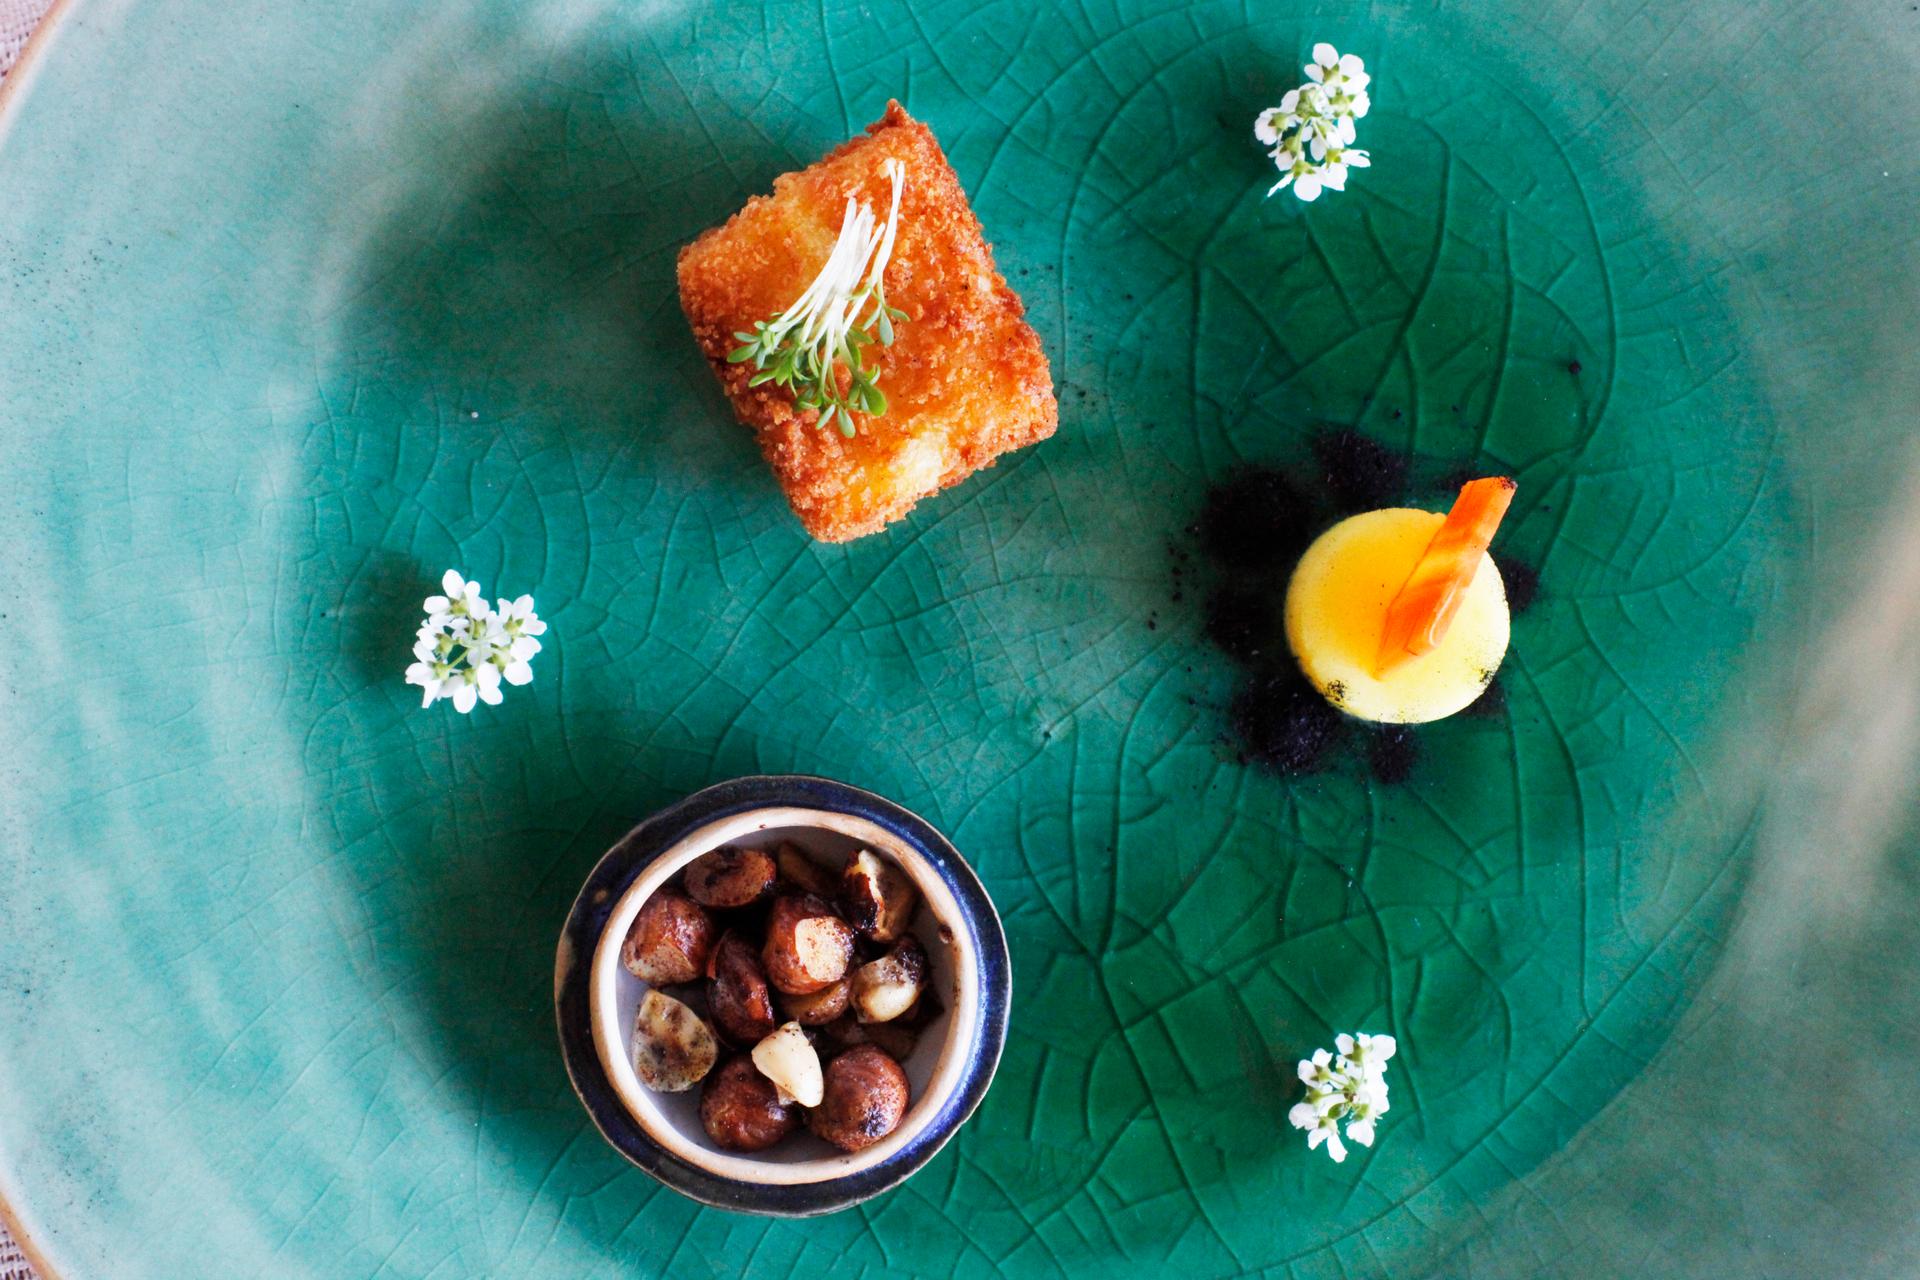 A poetic meal of three small dishes on a green plate